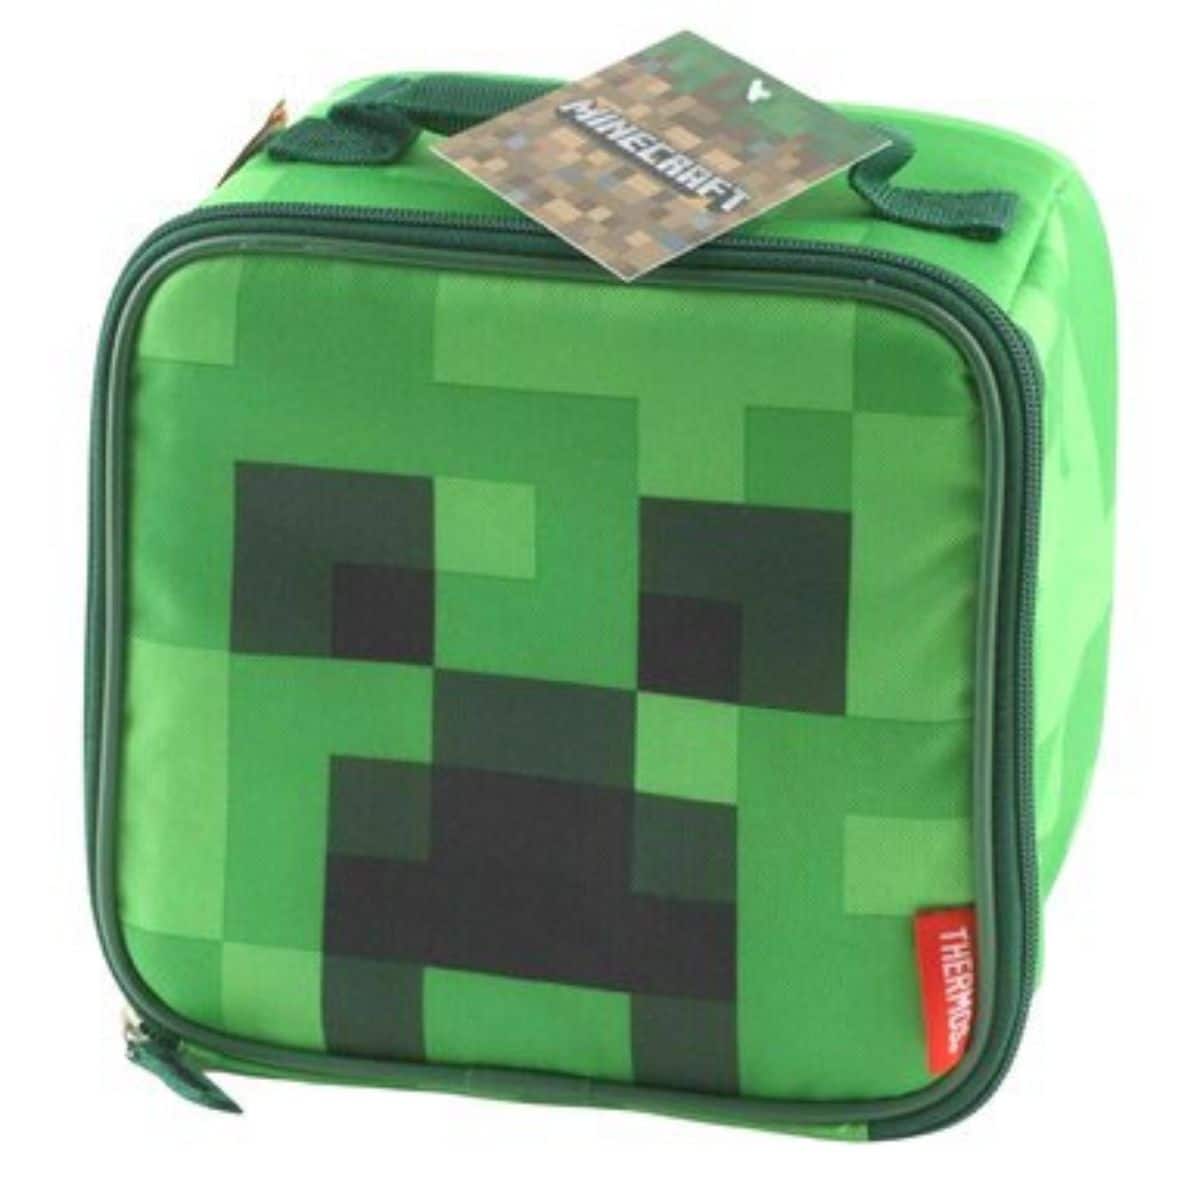 https://babyaccesorios.com/wp-content/uploads/2021/08/Thermos-Minecraft-Cube-Tote-Lunch-Box-1.jpg